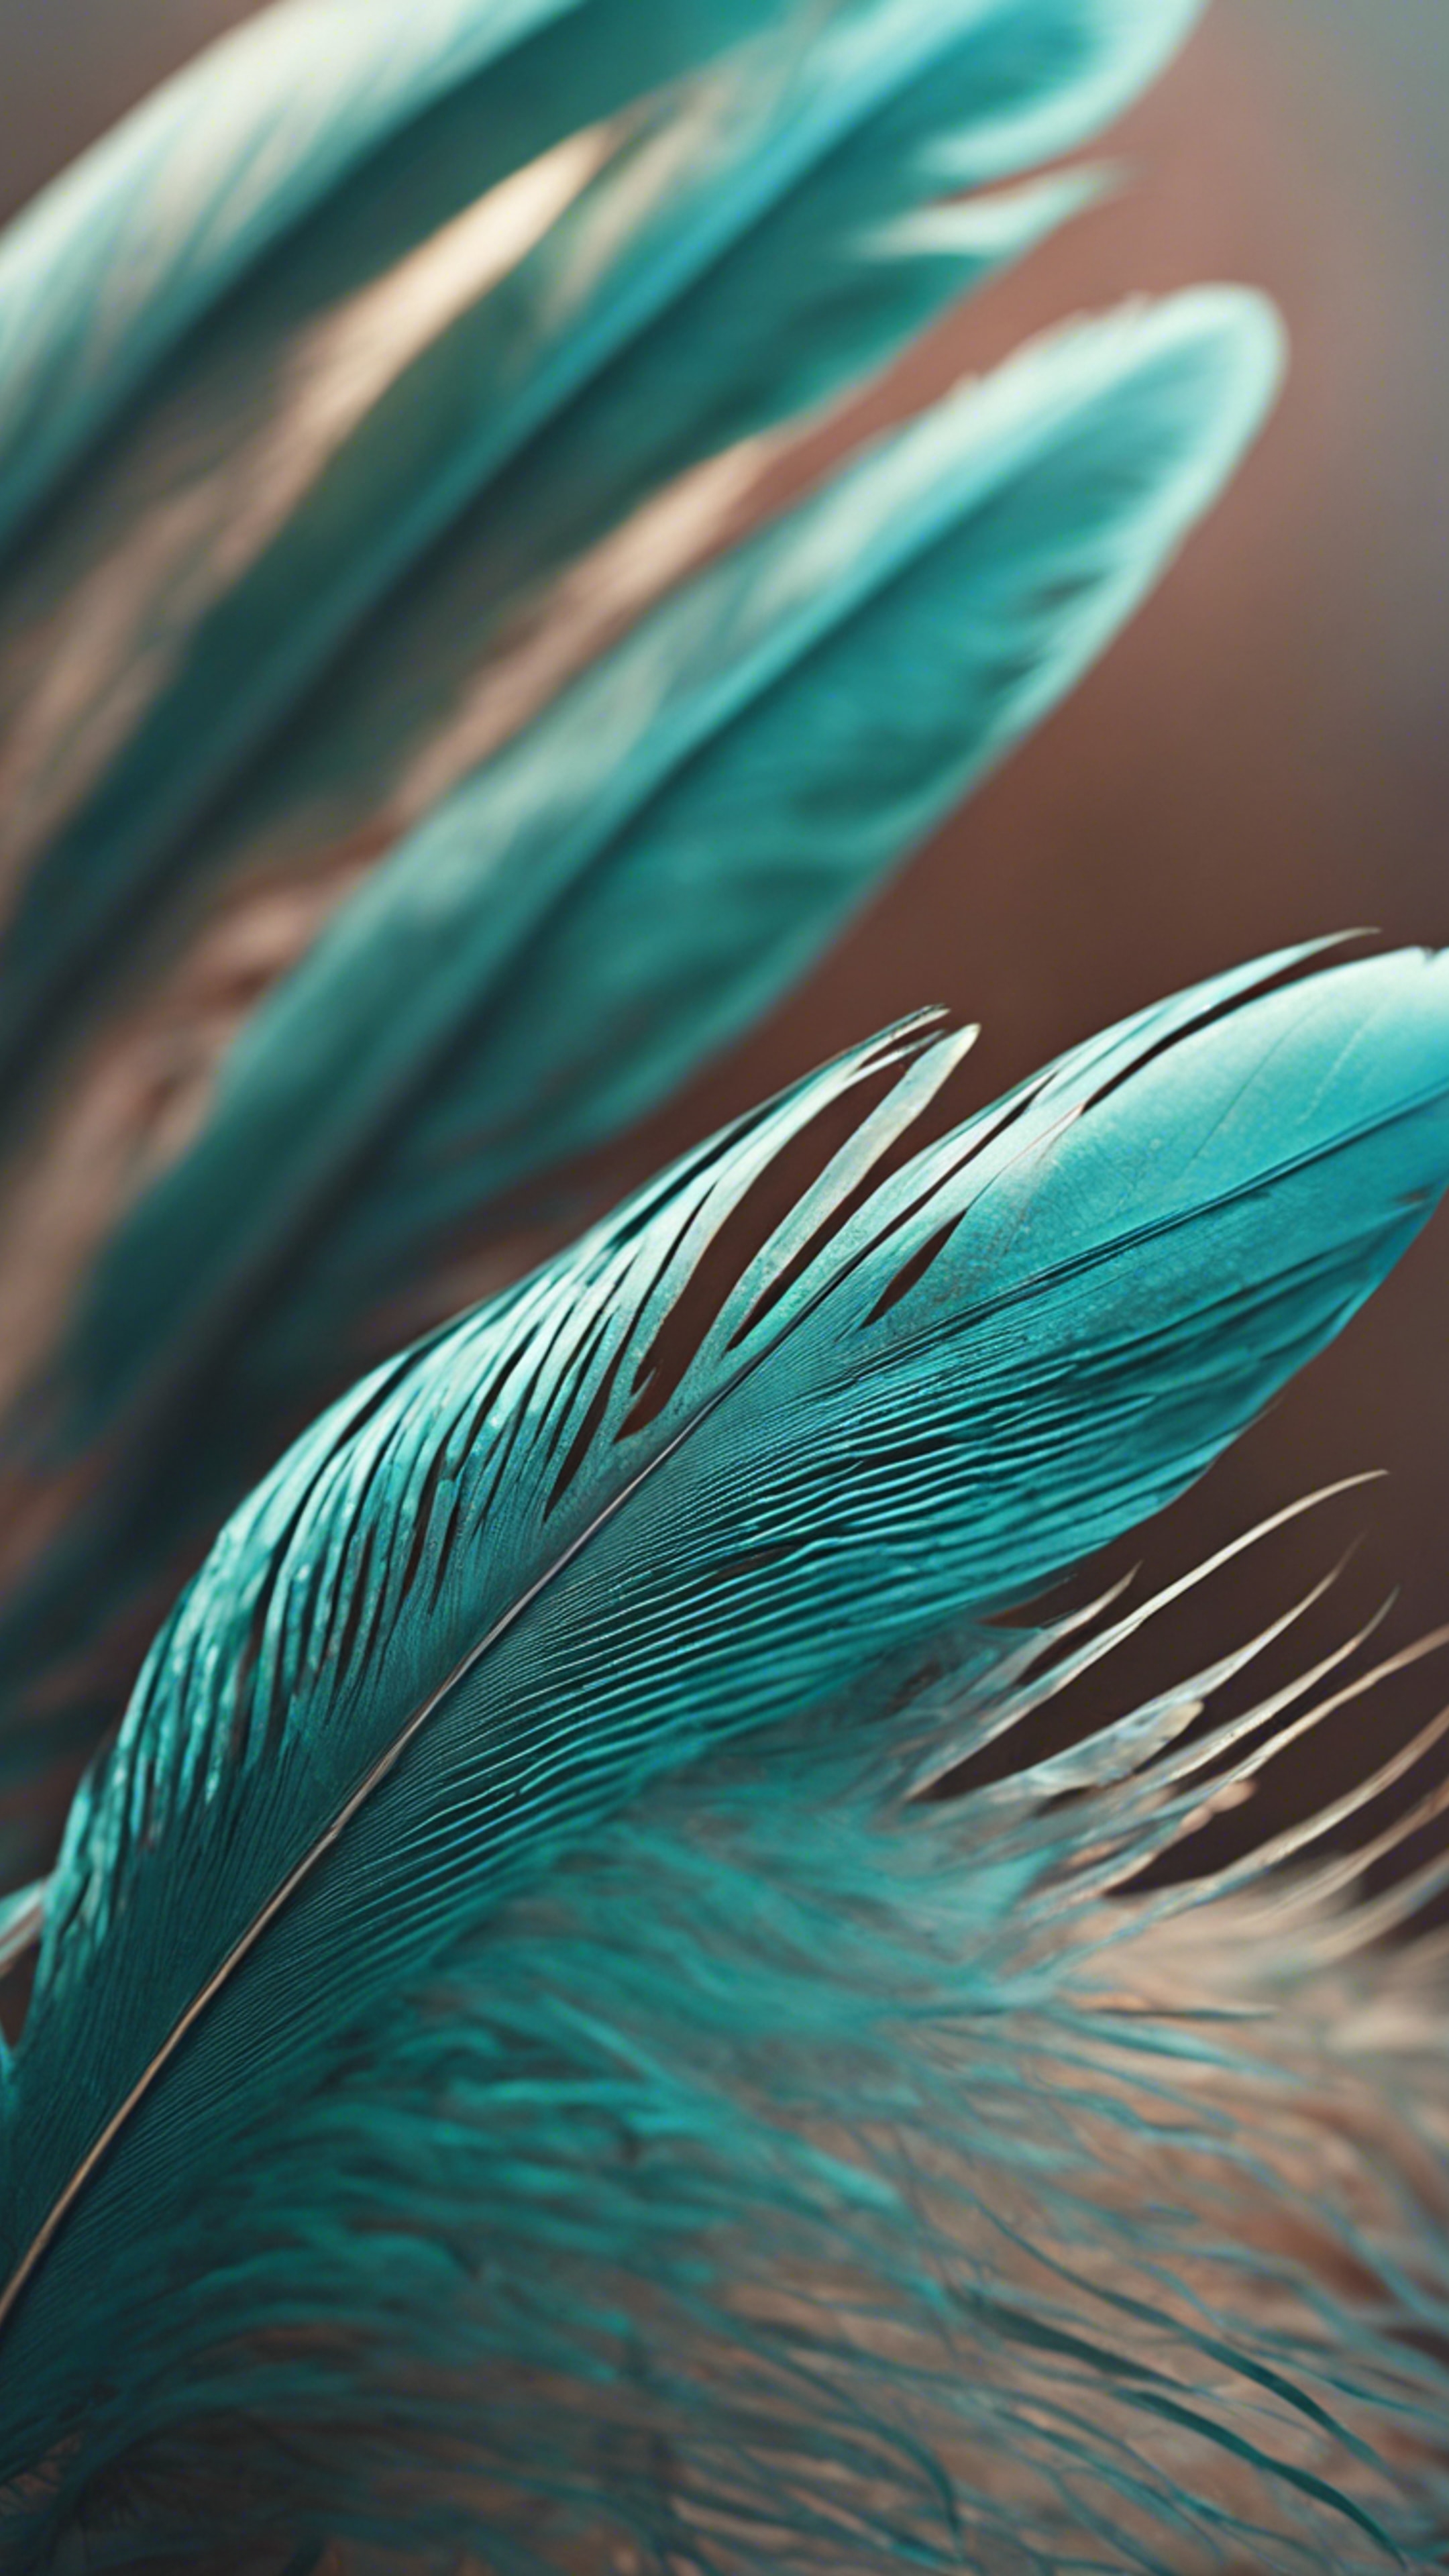 A close-up view of an exotic cool teal-colored birds' feather. Tapeta[44d0beeee9f542d4ae1e]